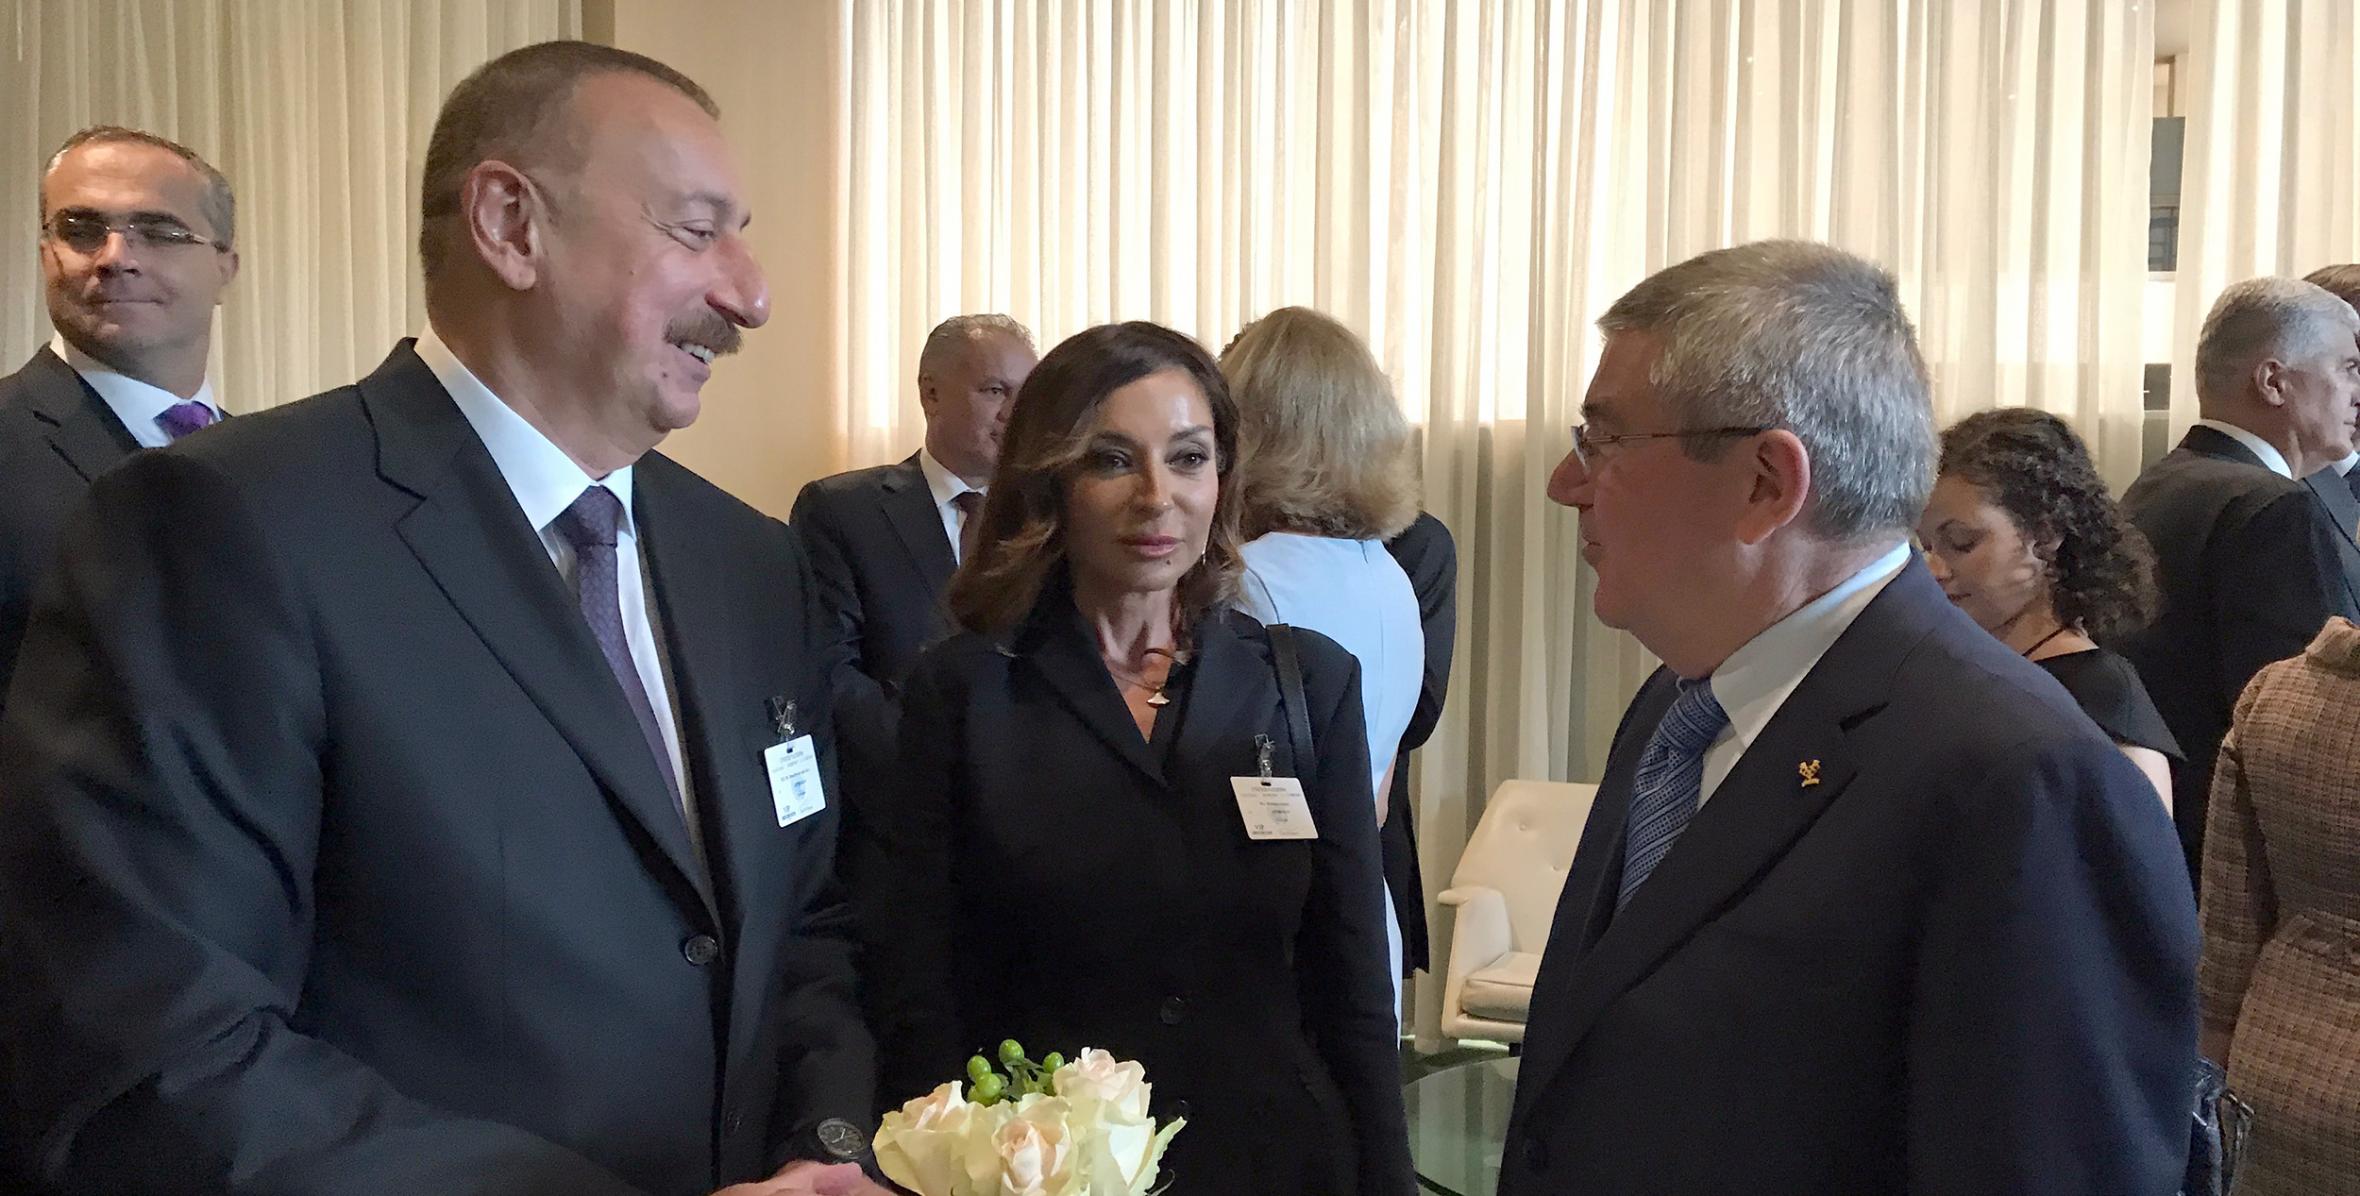 Photos taken during the visit of Ilham Aliyev and first lady Mehriban Aliyeva to the United States of America